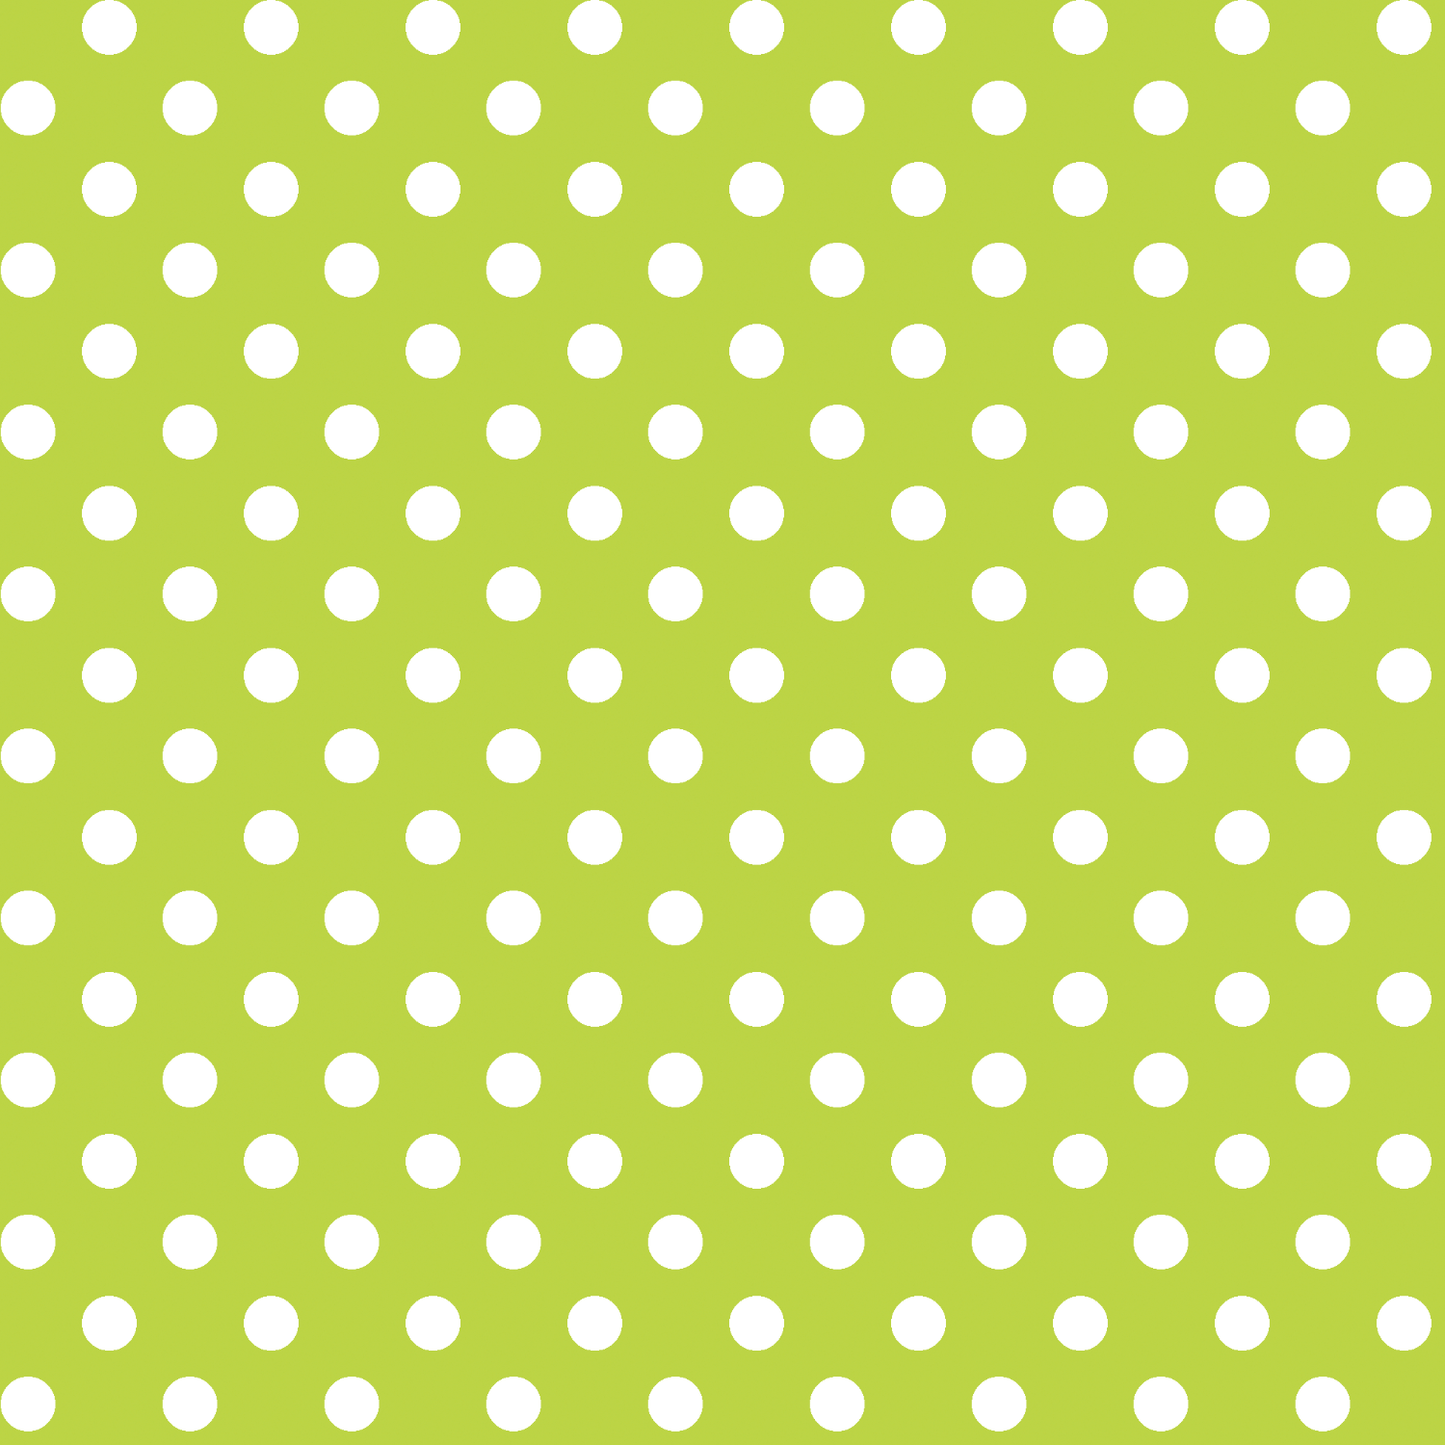 Candy Dot in Lime